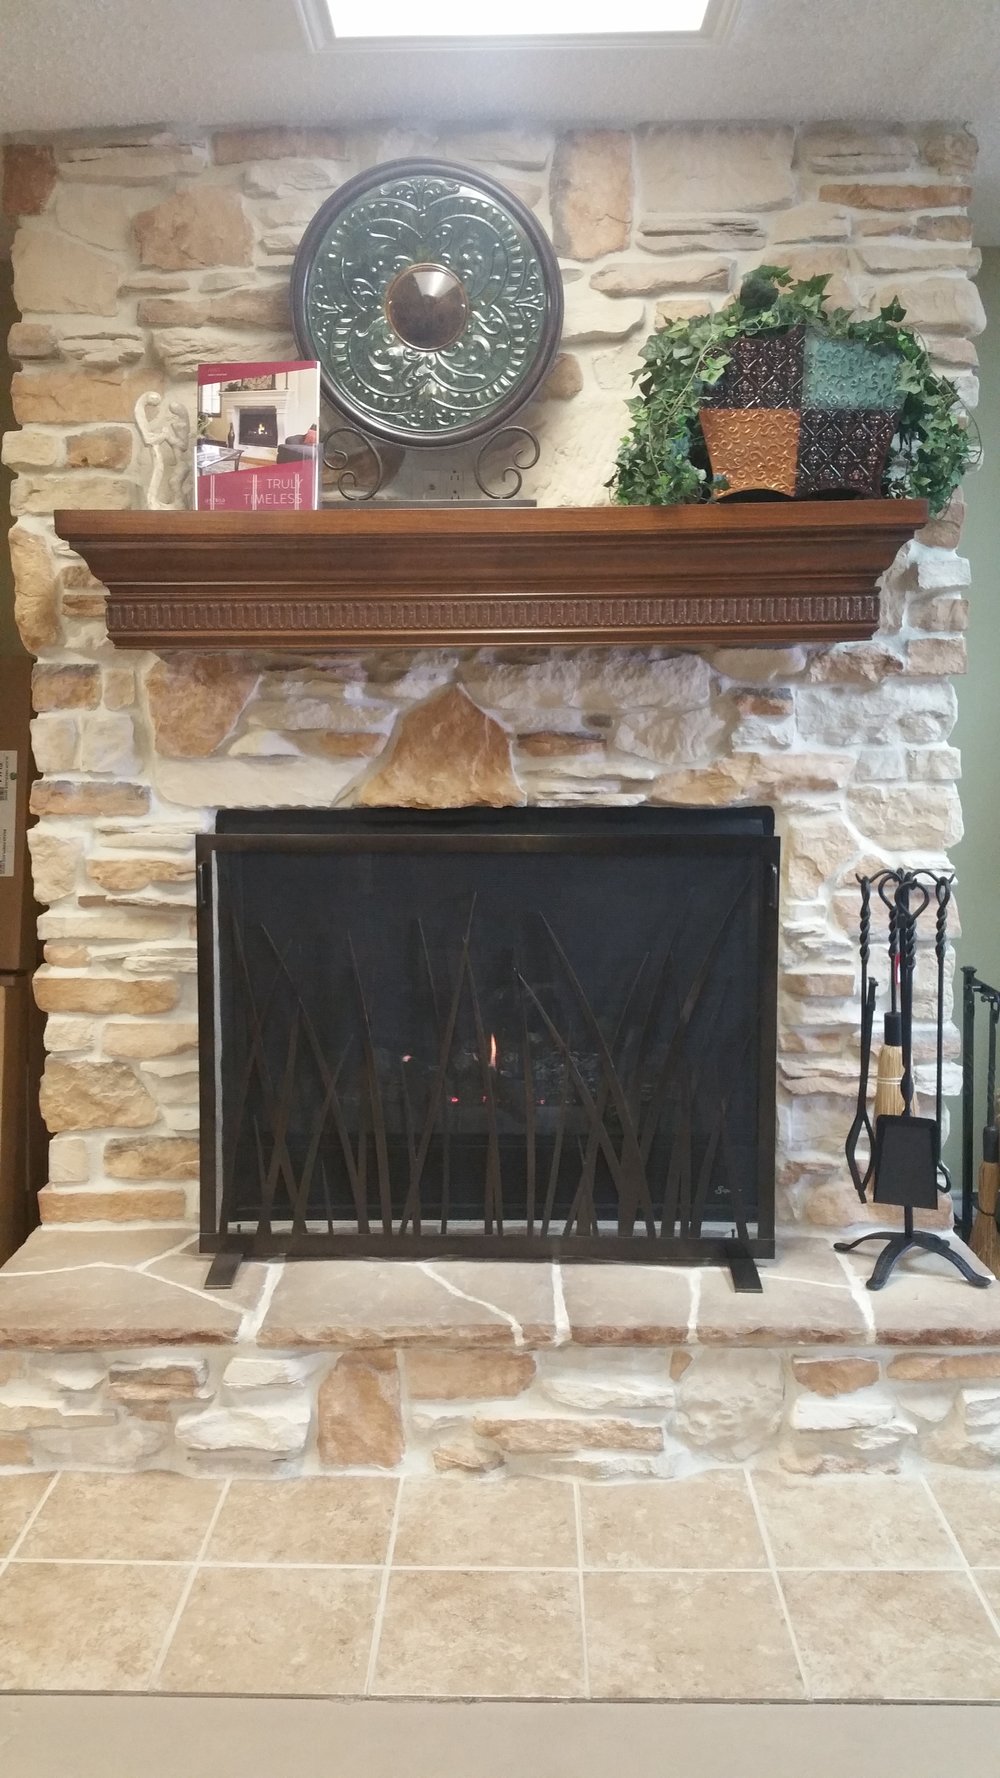 Where to Buy Fireplace Hearth Stone Awesome Leonard S Stone and Fireplace